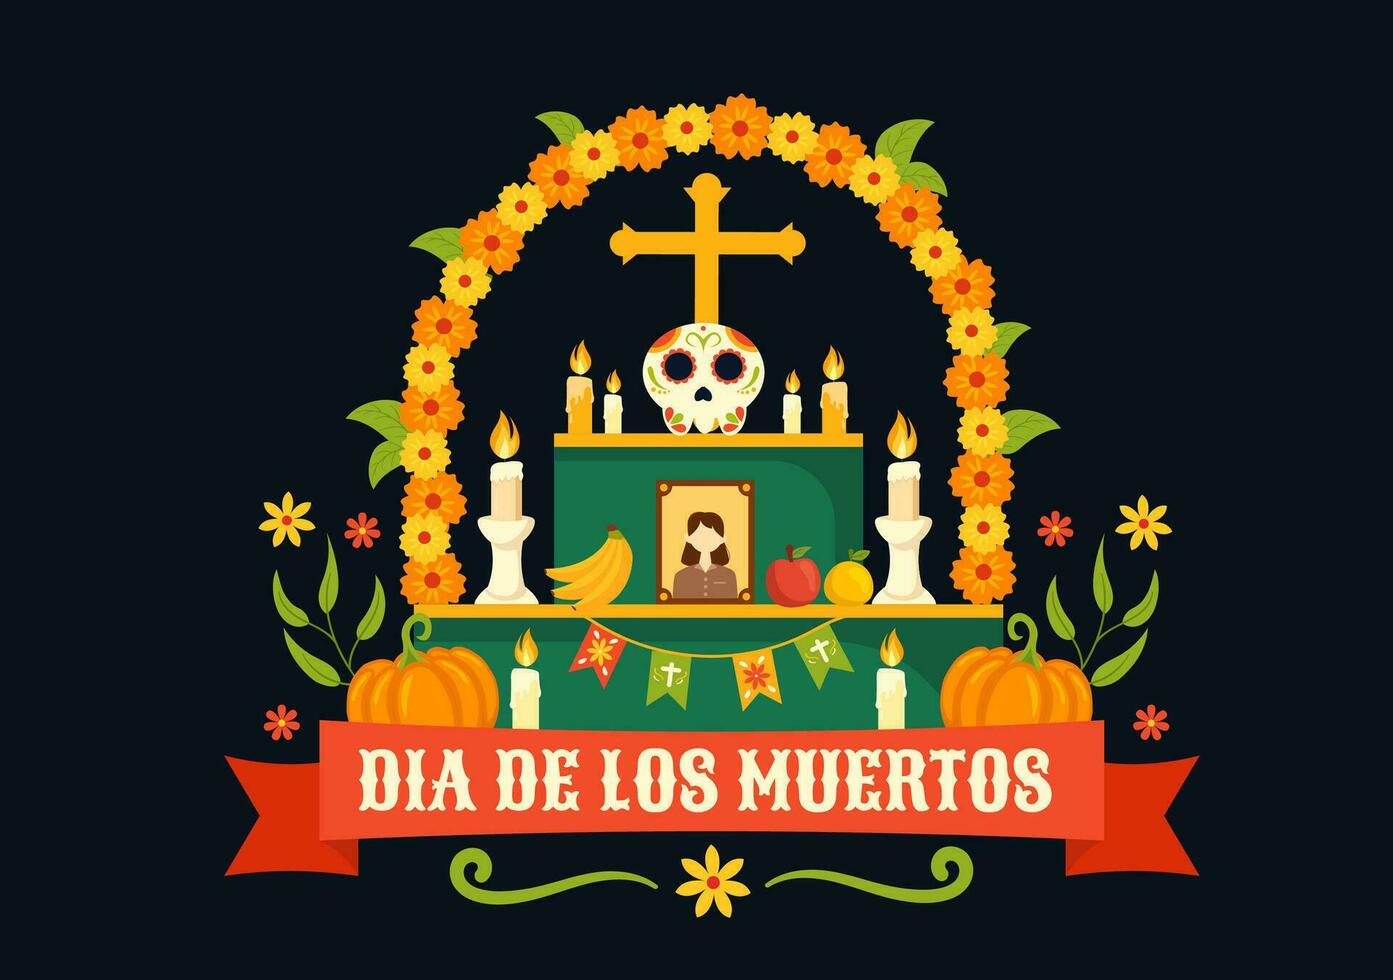 Dia de Los Muertos Vector Illustration with Day of the Dead, Play Music, Skeleton in Mexican Costumes and Sombrero in Flat Cartoon Background